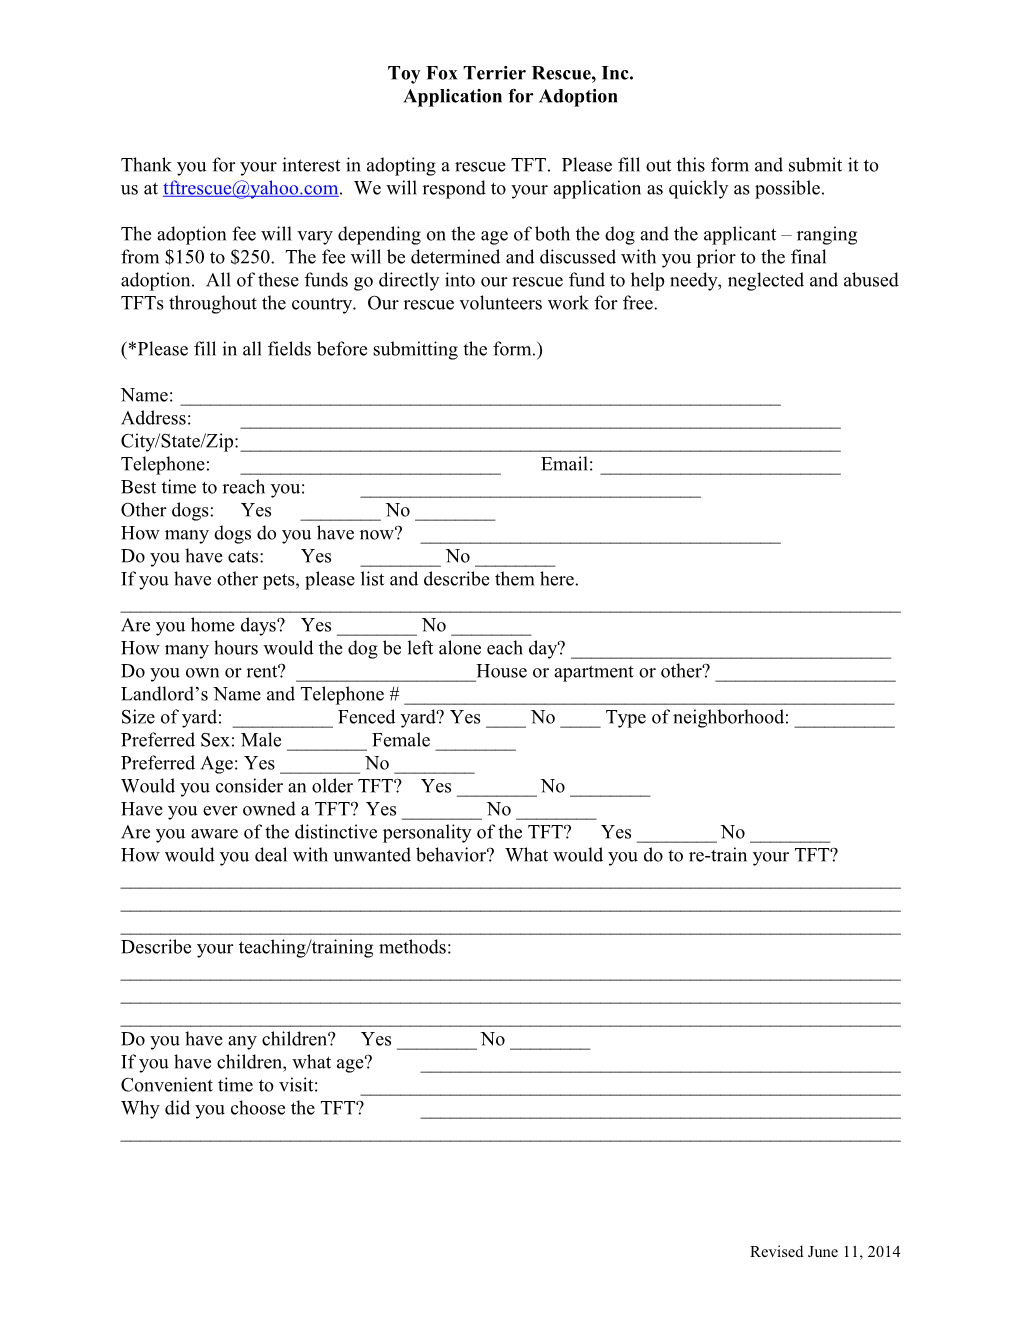 Fill out This Form with the Requested Information and Submit It to Us